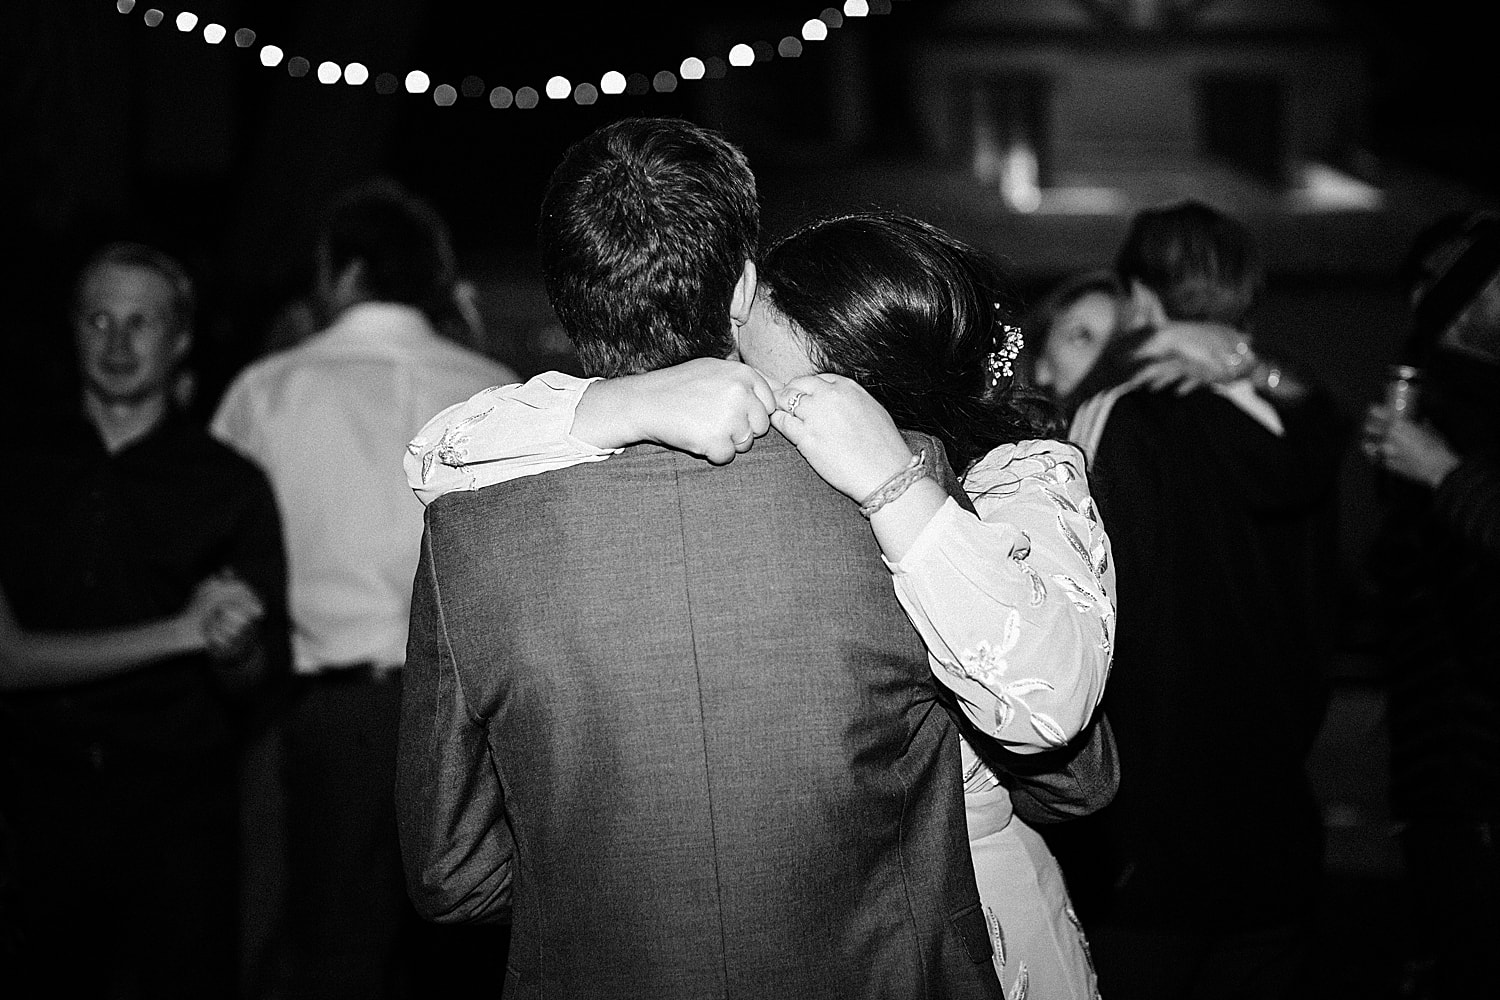 Last dance during the wedding